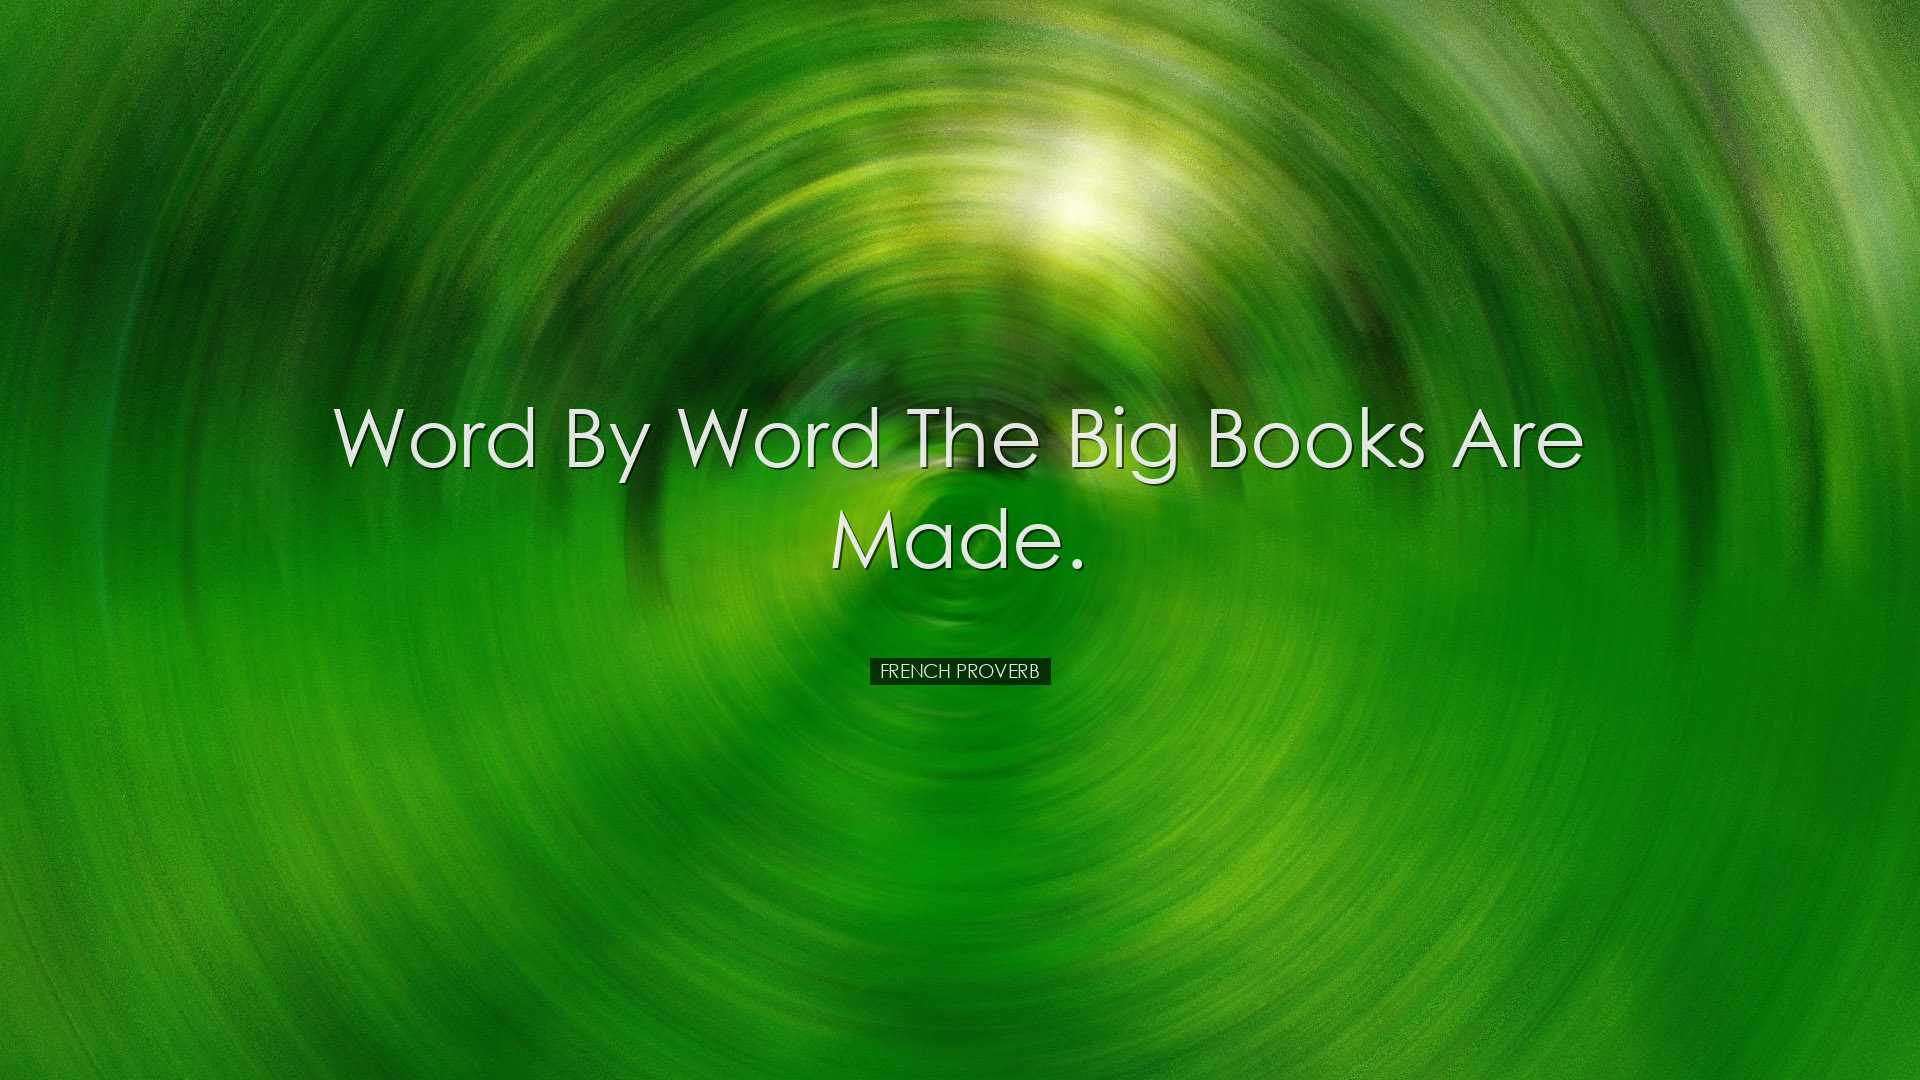 Word by word the big books are made. - French Proverb